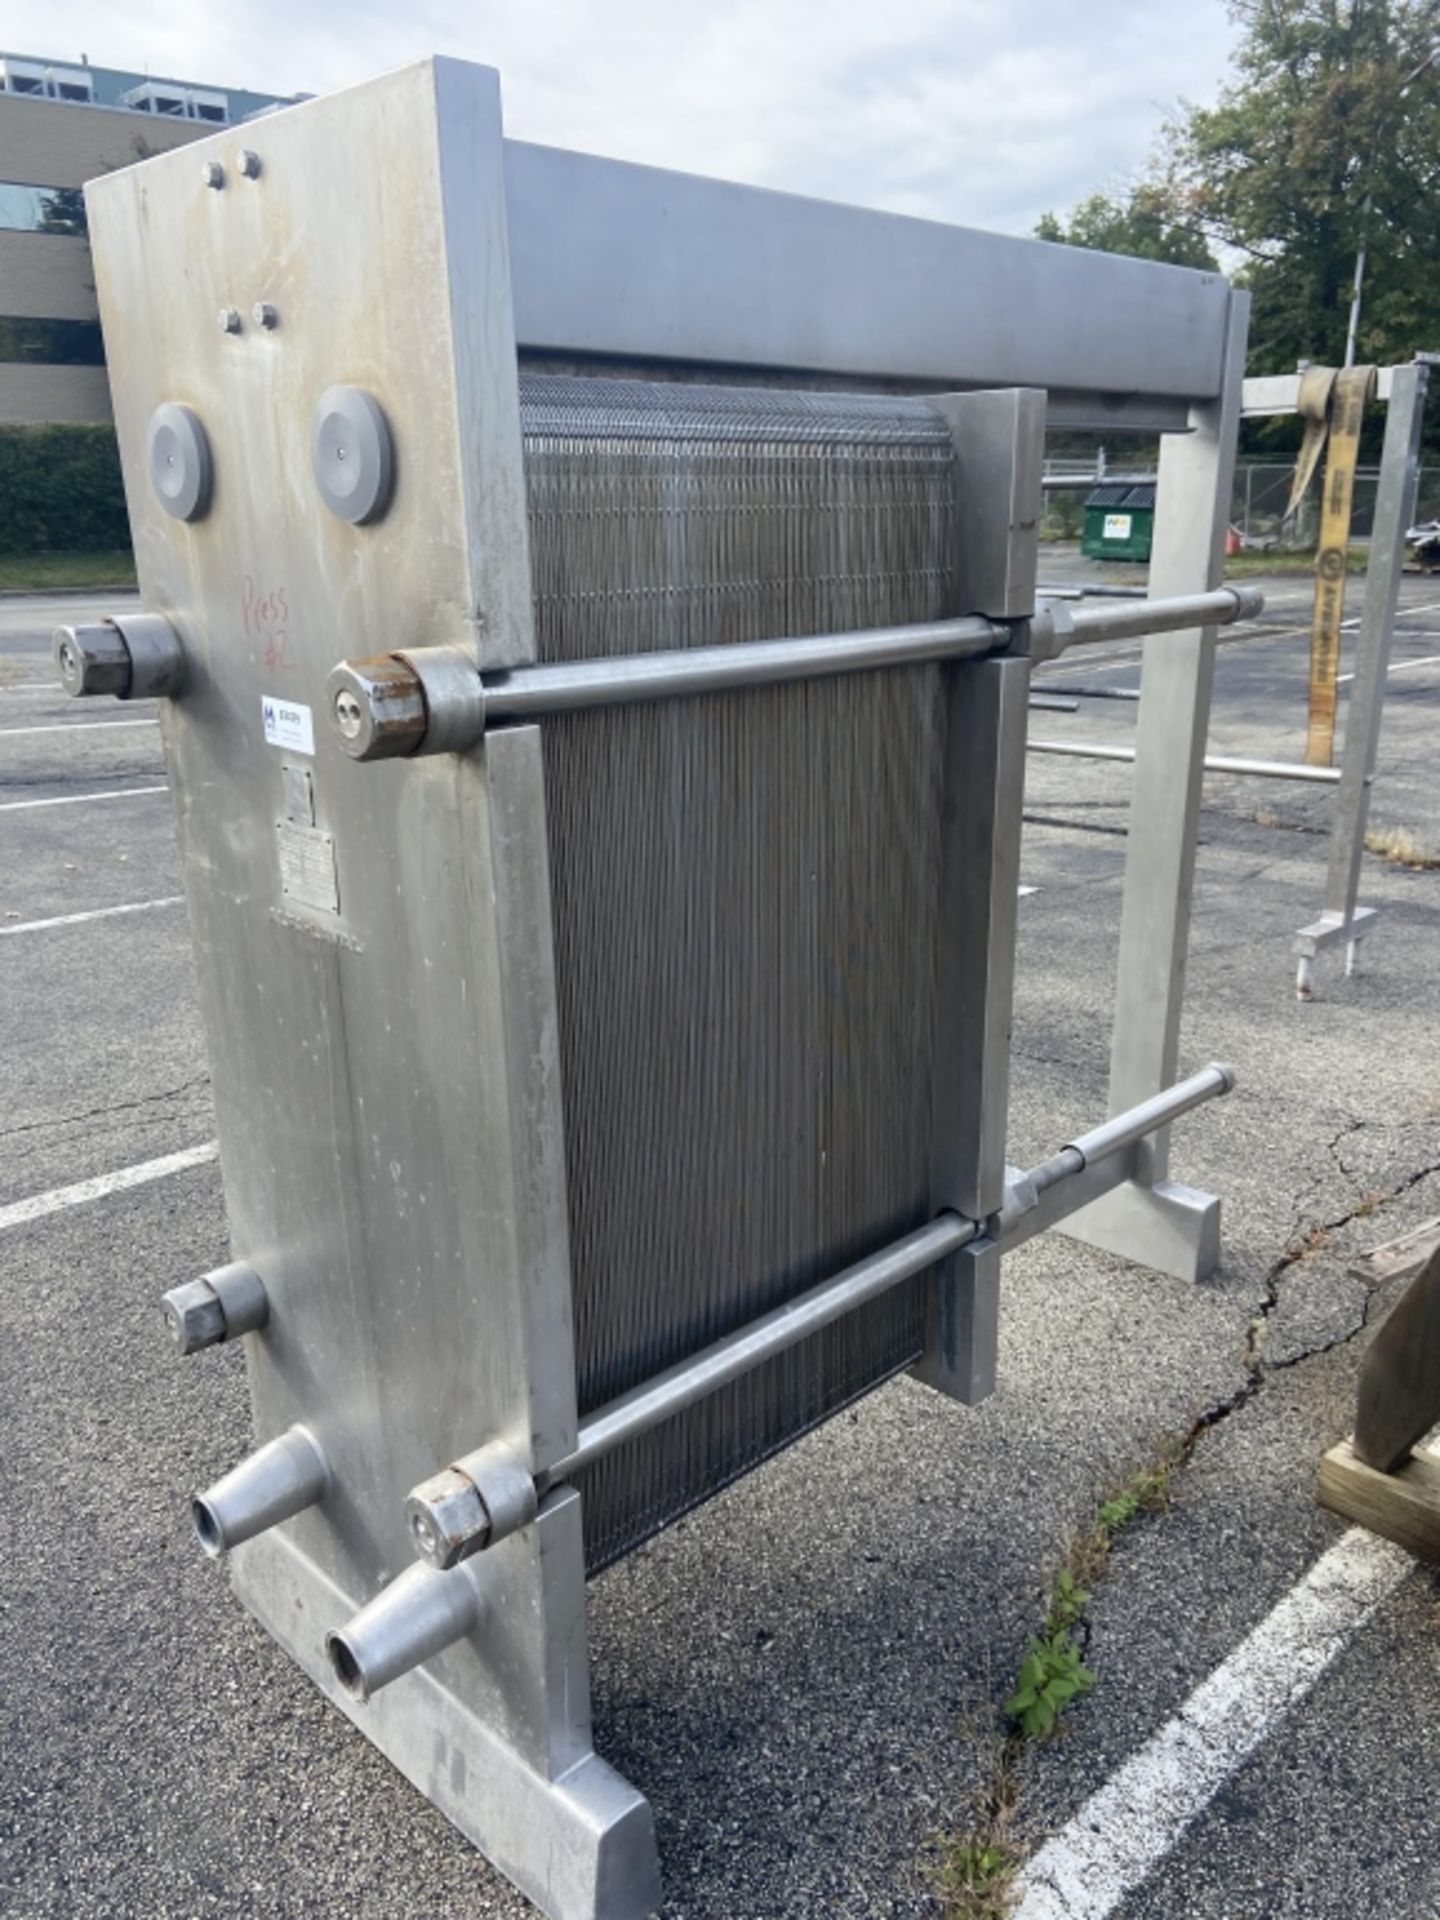 Alpha Laval S/S Plate Heat Exchanger, Type H10-RG, S/N 3951 Max. Work Pressure 1.0 MPA 10 Bar, - Image 5 of 8